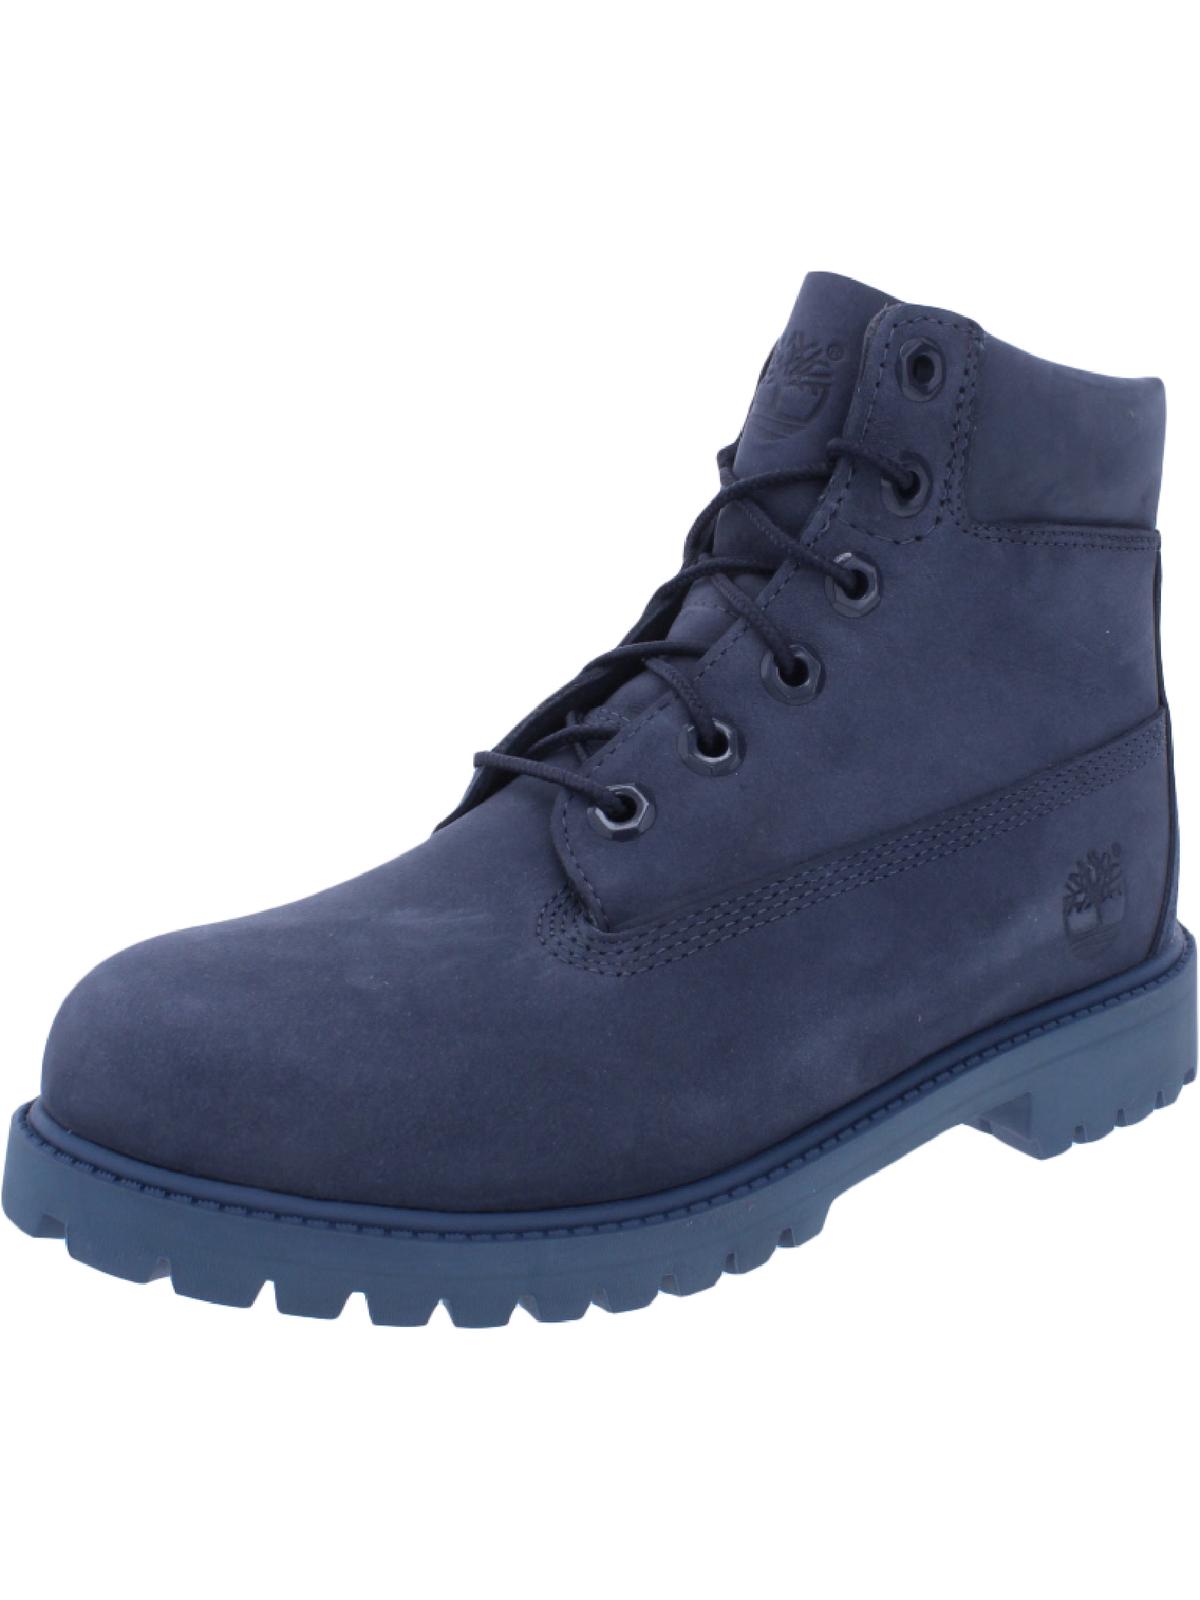 Timberland Boys Leather Lace Up Ankle Boots Blue 4 Medium (D) Big Kid - image 1 of 3